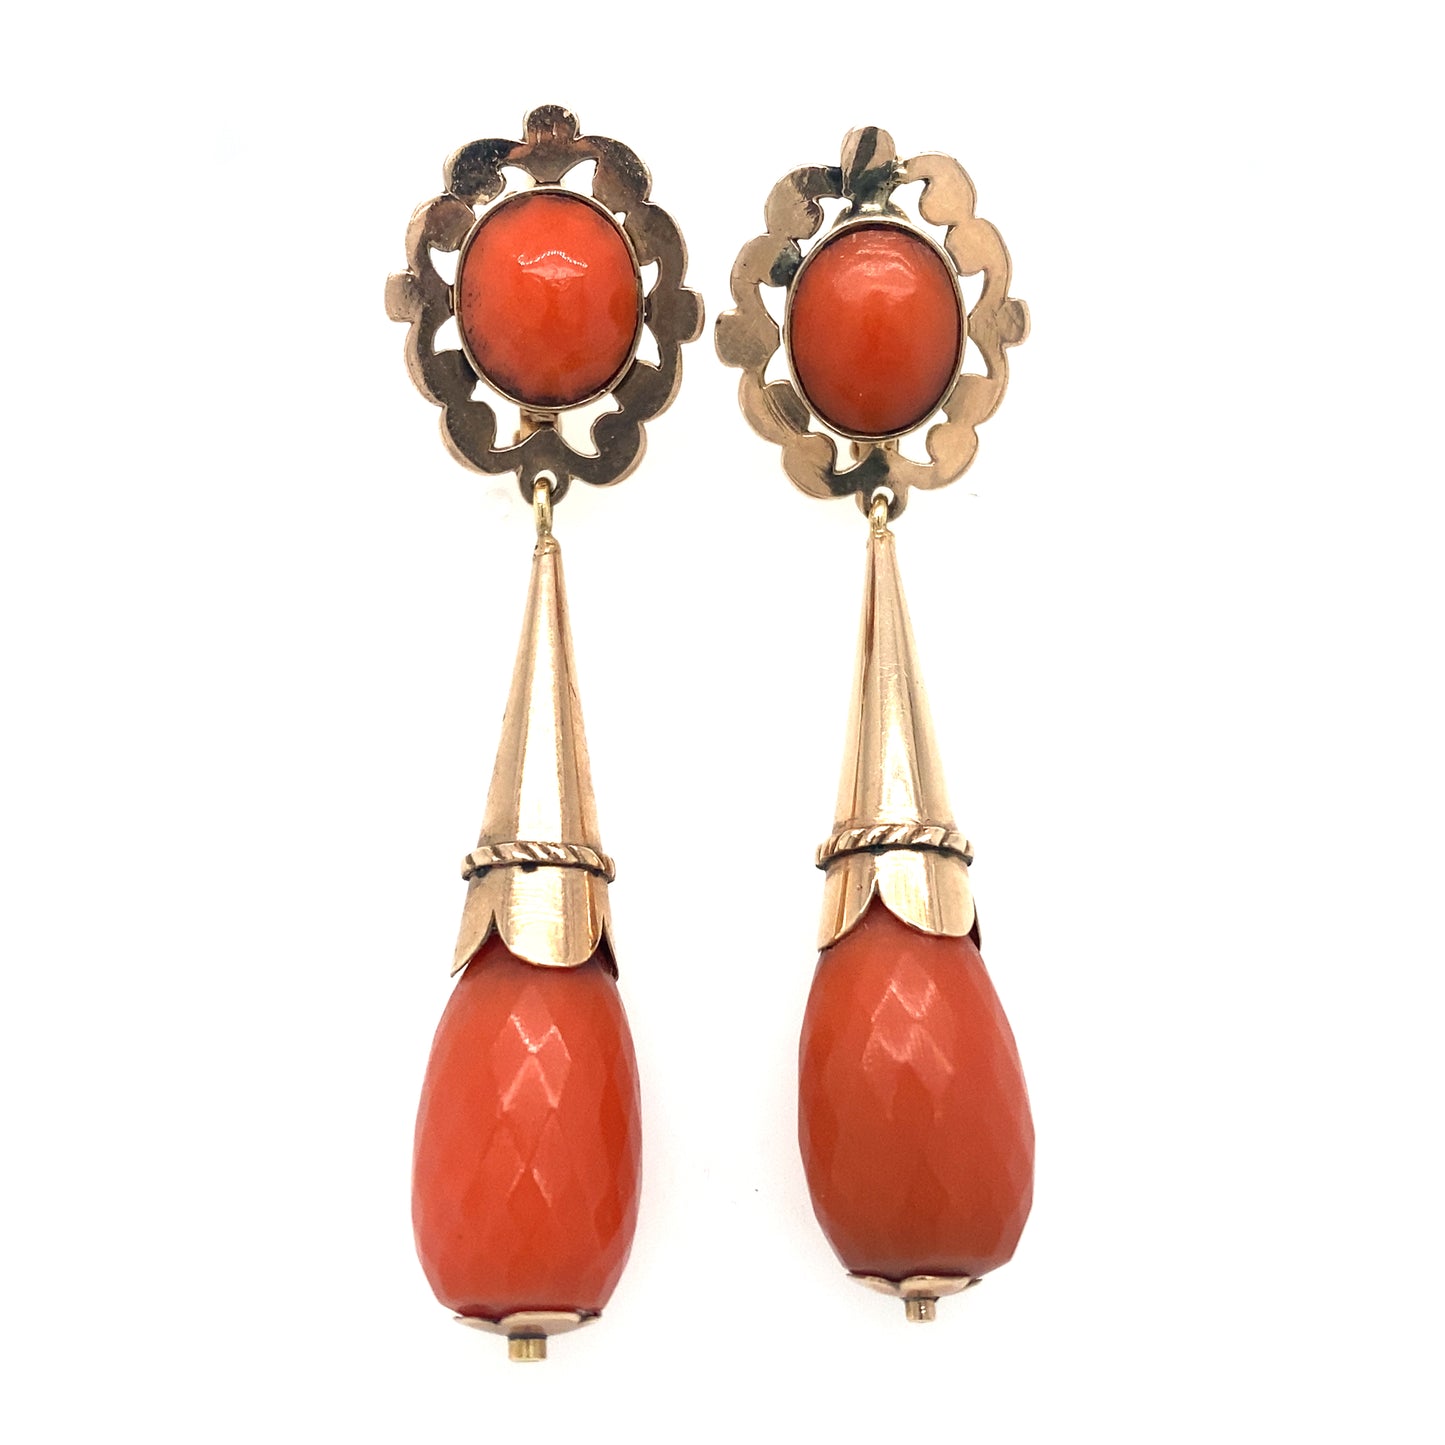 Circa 1890s Victorian Faceted Coral Dangle Earrings in 14K Gold